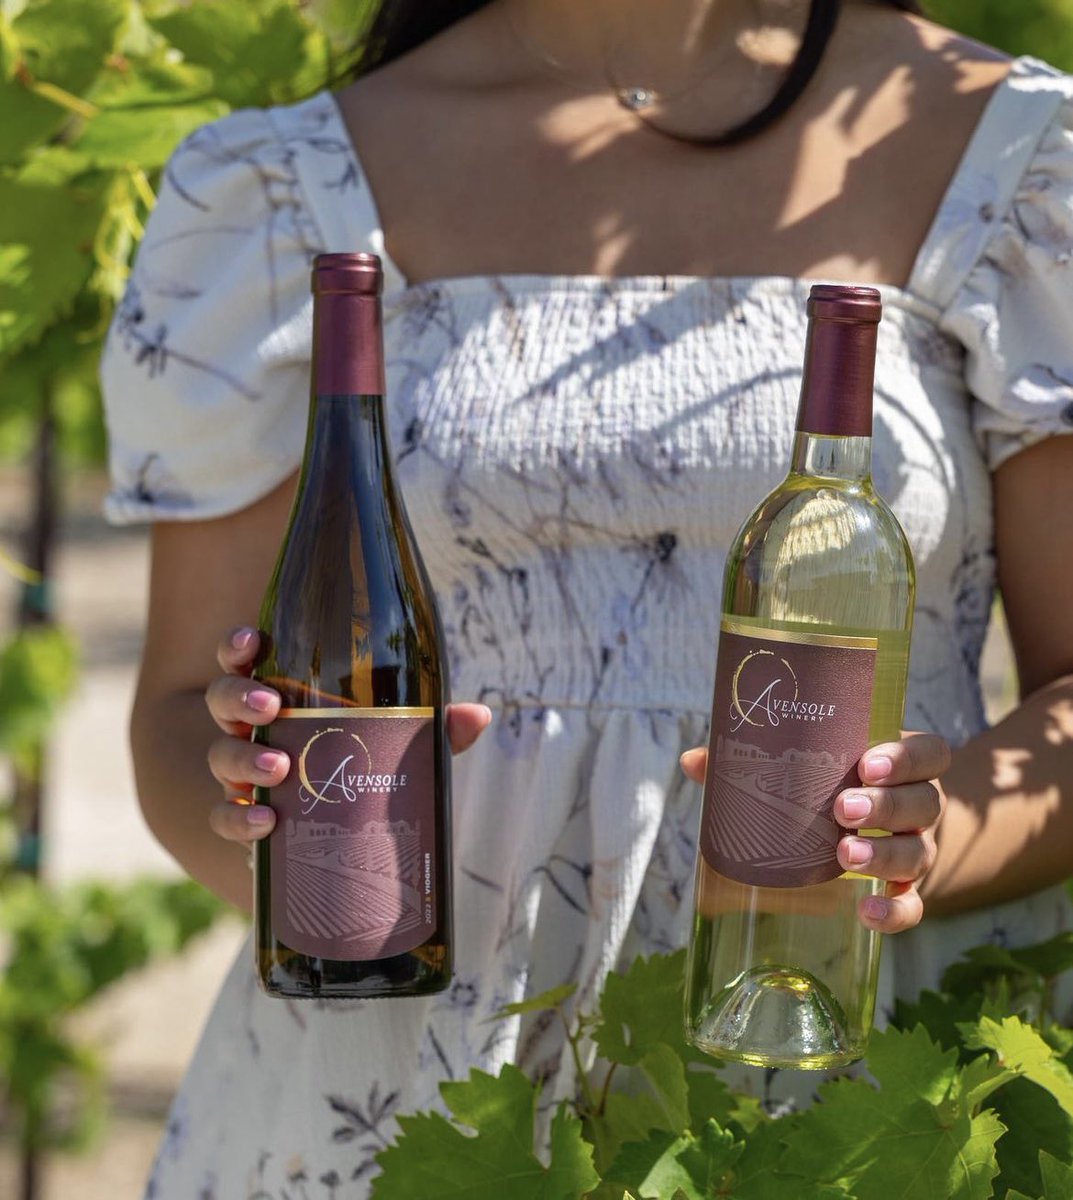 Our 2022 Susan (100% #sauvignonblanc) and 2022 ‘#Viognier are now available in the Tasting Room and online!

Viognier is luscious and vibrant while our Susan is an aromatic and complex.

#avensolewinery #visittemecula #liveglassfull